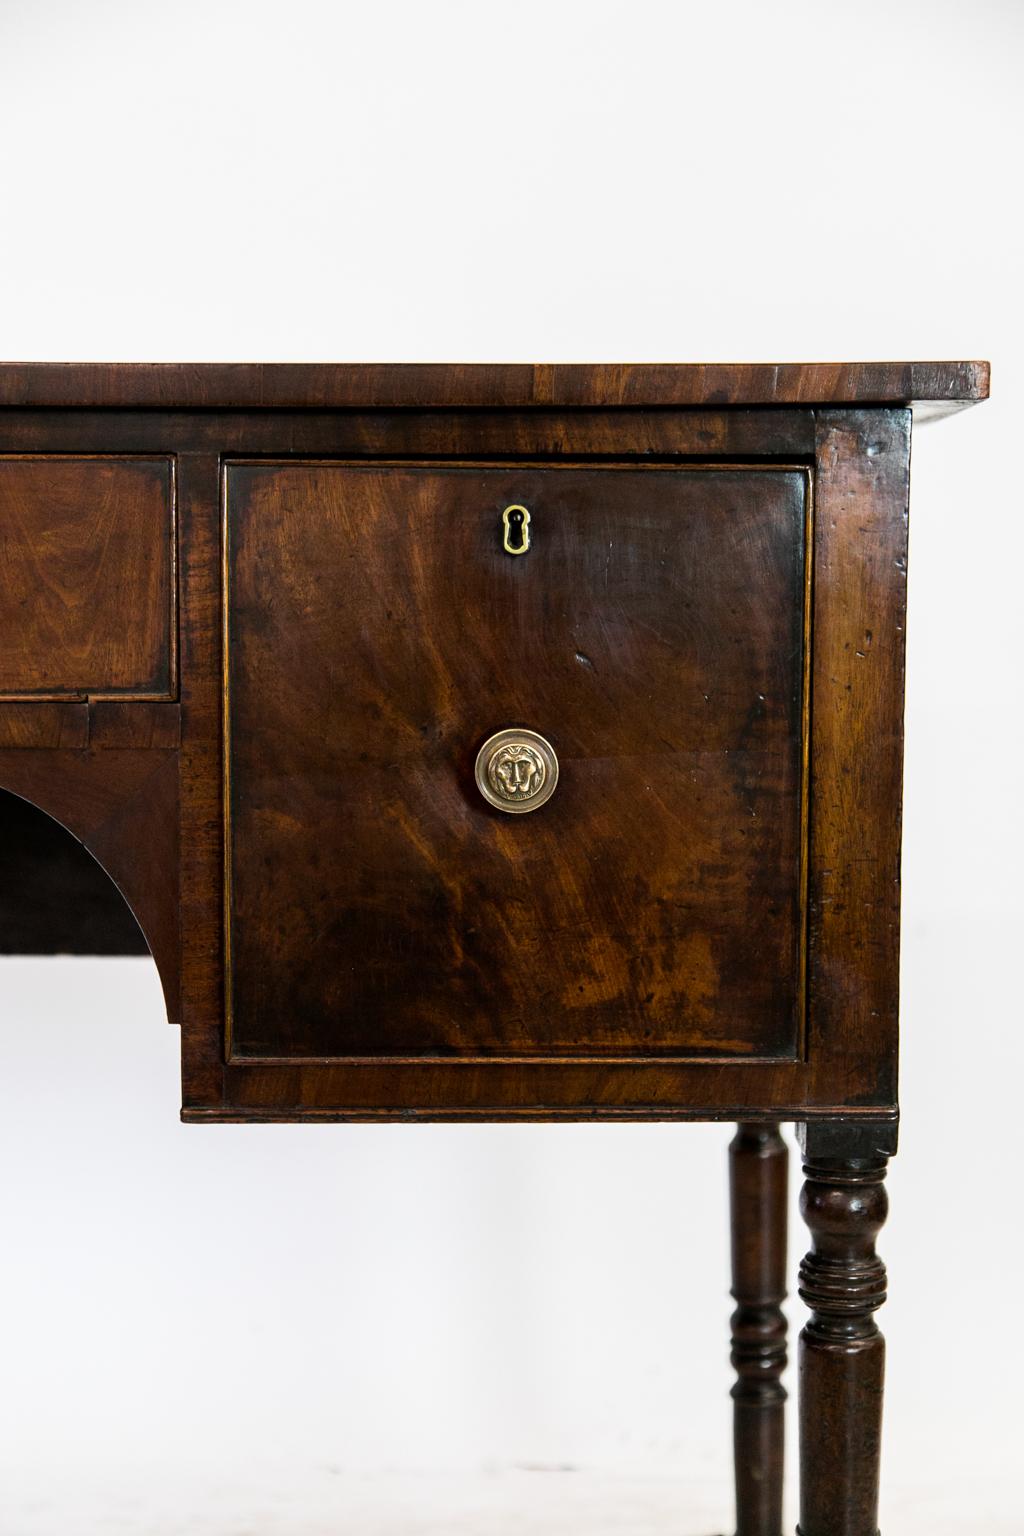 This early 19th century three-drawer English mahogany server has a center drawer with arched supports below. The drawers have cockbeaded edges and bullnose molding on the front and inside the arch. The four legs have multiple turnings.

      